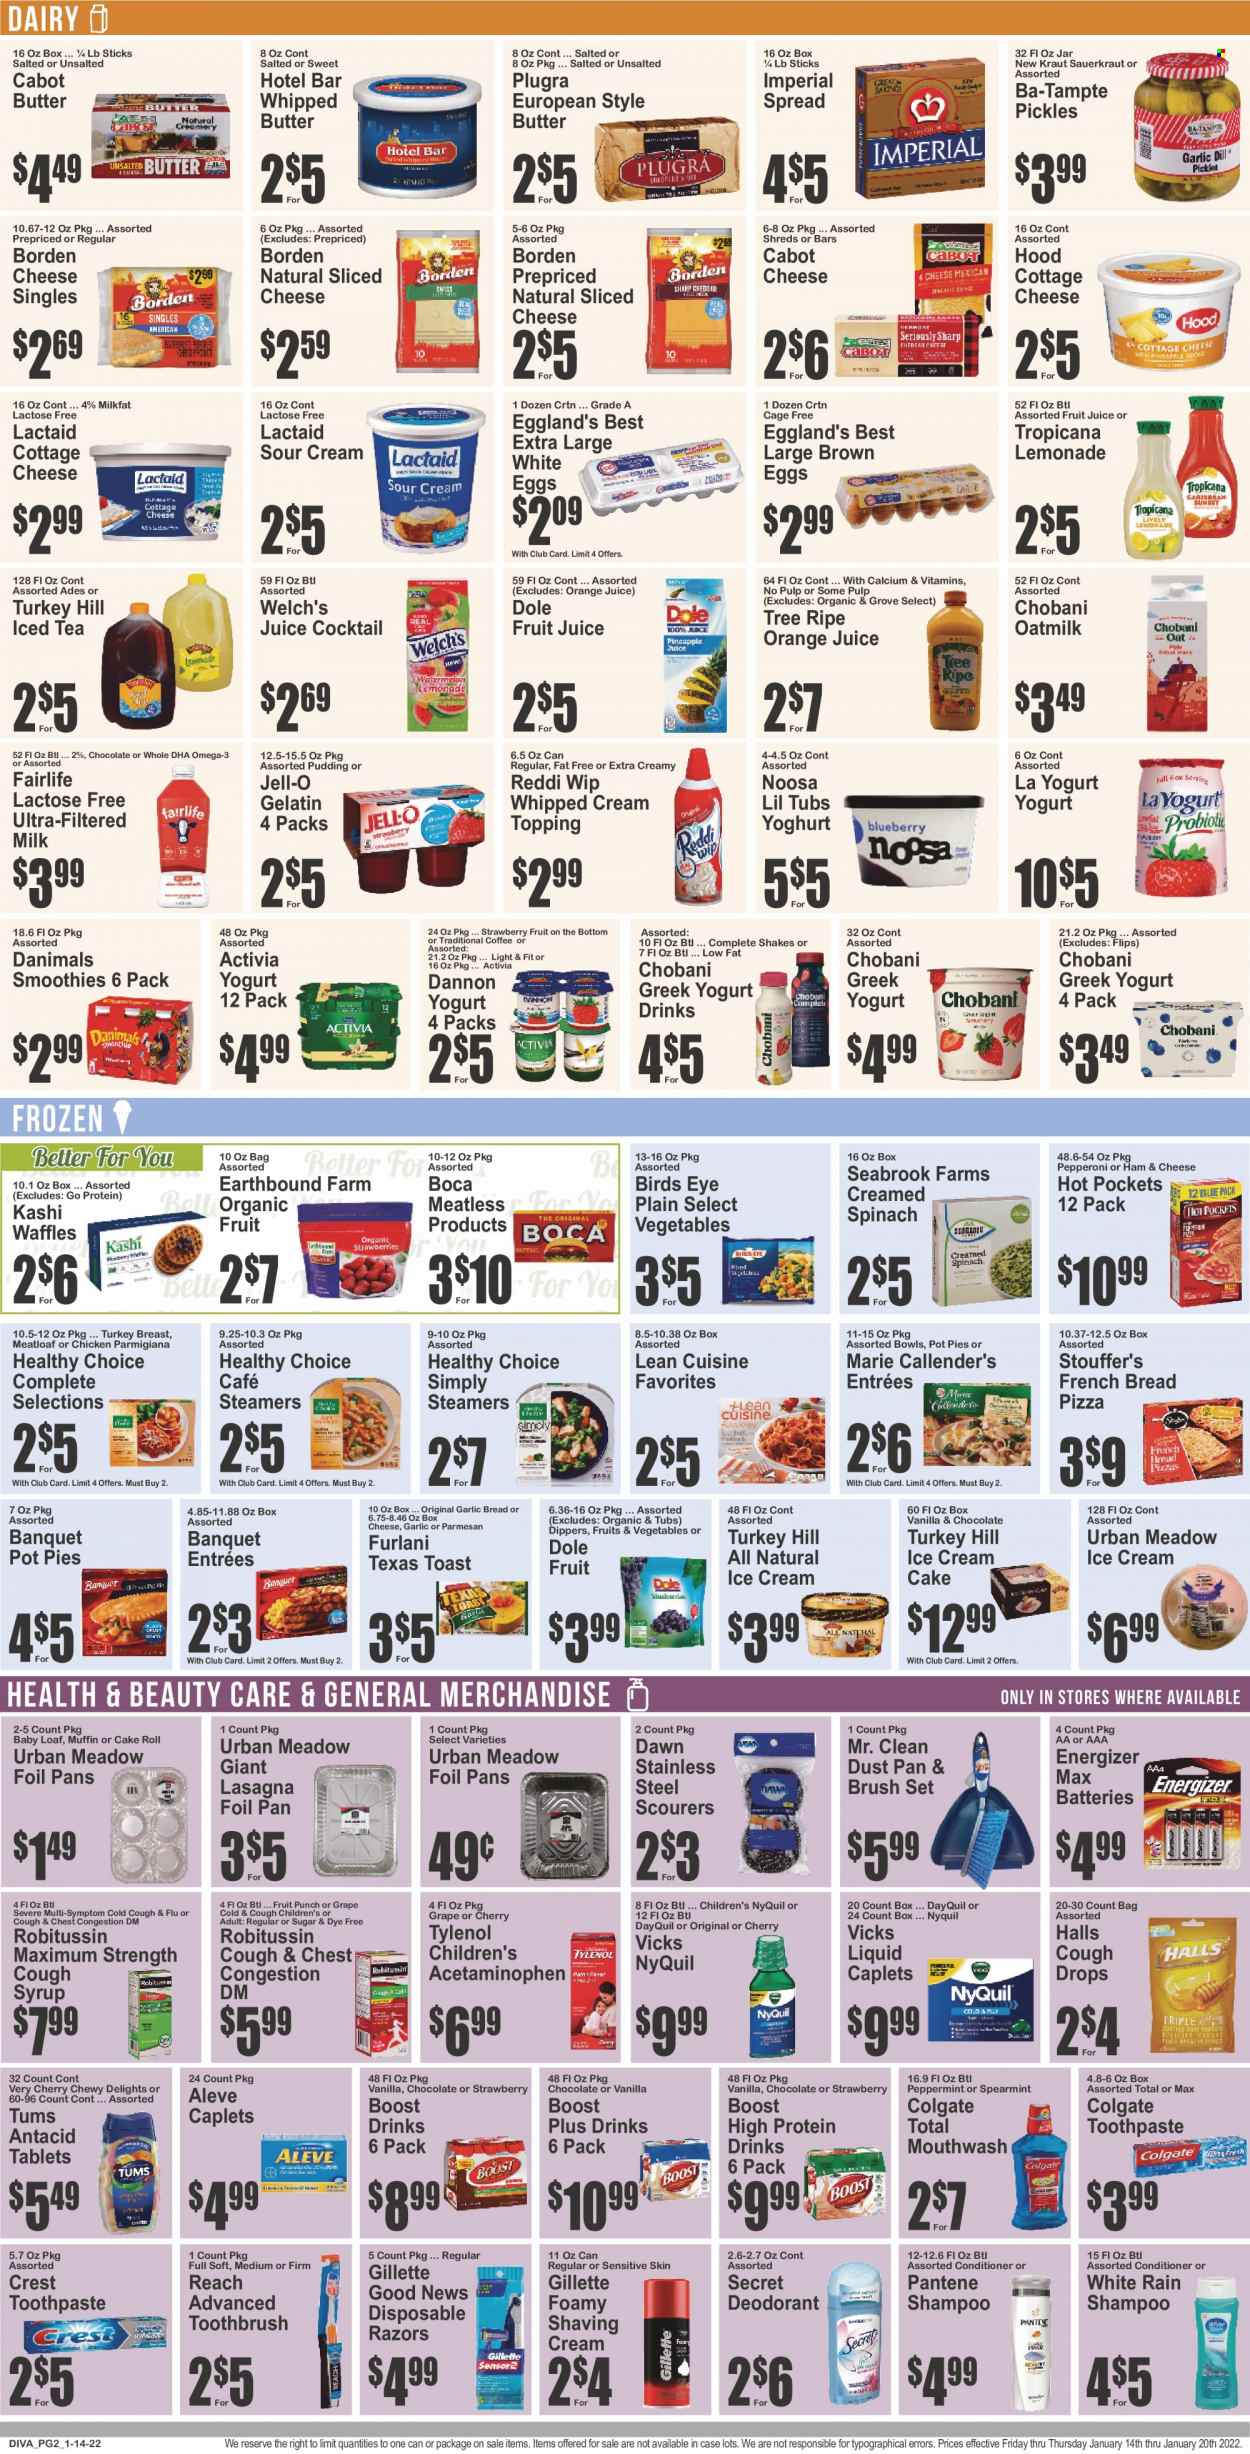 thumbnail - Key Food Flyer - 01/14/2022 - 01/20/2022 - Sales products - bread, cake, french bread, pot pie, waffles, Dole, cherries, Welch's, hot pocket, pizza, meatloaf, Bird's Eye, lasagna meal, Lean Cuisine, Healthy Choice, Marie Callender's, pepperoni, cottage cheese, Lactaid, sliced cheese, greek yoghurt, pudding, yoghurt, Activia, Chobani, Dannon, Danimals, milk, protein drink, yoghurt drink, shake, oat milk, eggs, cage free eggs, whipped butter, sour cream, whipped cream, ice cream, Stouffer's, parmigiana, Halls, sugar, topping, Jell-O, sauerkraut, pickles, syrup, lemonade, orange juice, juice, fruit juice, ice tea, fruit punch, smoothie, Boost, coffee, turkey breast, shampoo, Colgate, toothbrush, toothpaste, mouthwash, Crest, conditioner, Pantene, anti-perspirant, deodorant, Gillette, disposable razor, Vicks, dustpan & brush, battery, Energizer, Aleve, calcium, DayQuil, Robitussin, Tylenol, NyQuil, Omega-3, Antacid, cough drops. Page 2.